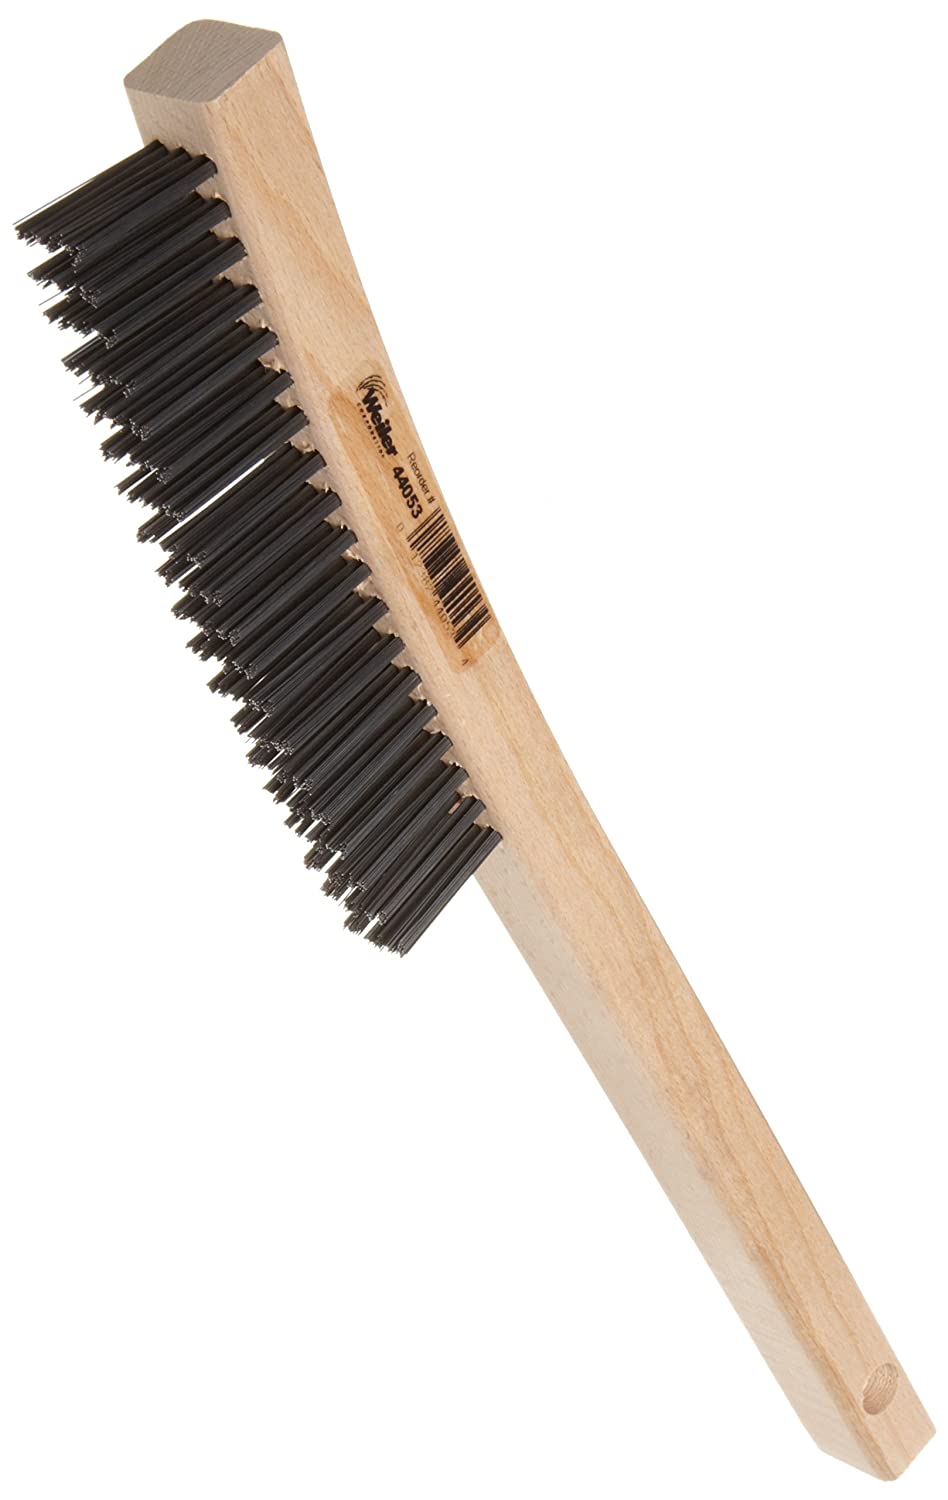 Weiler 0.012" Wire Size. 5-1/2" Brush Length. 14" X 7/8" Block Size. 3 X 19 No. Of Rows. Steel Bristles. Hardwood Block. Curved Handle Scratch Brush - MPR Tools & Equipment